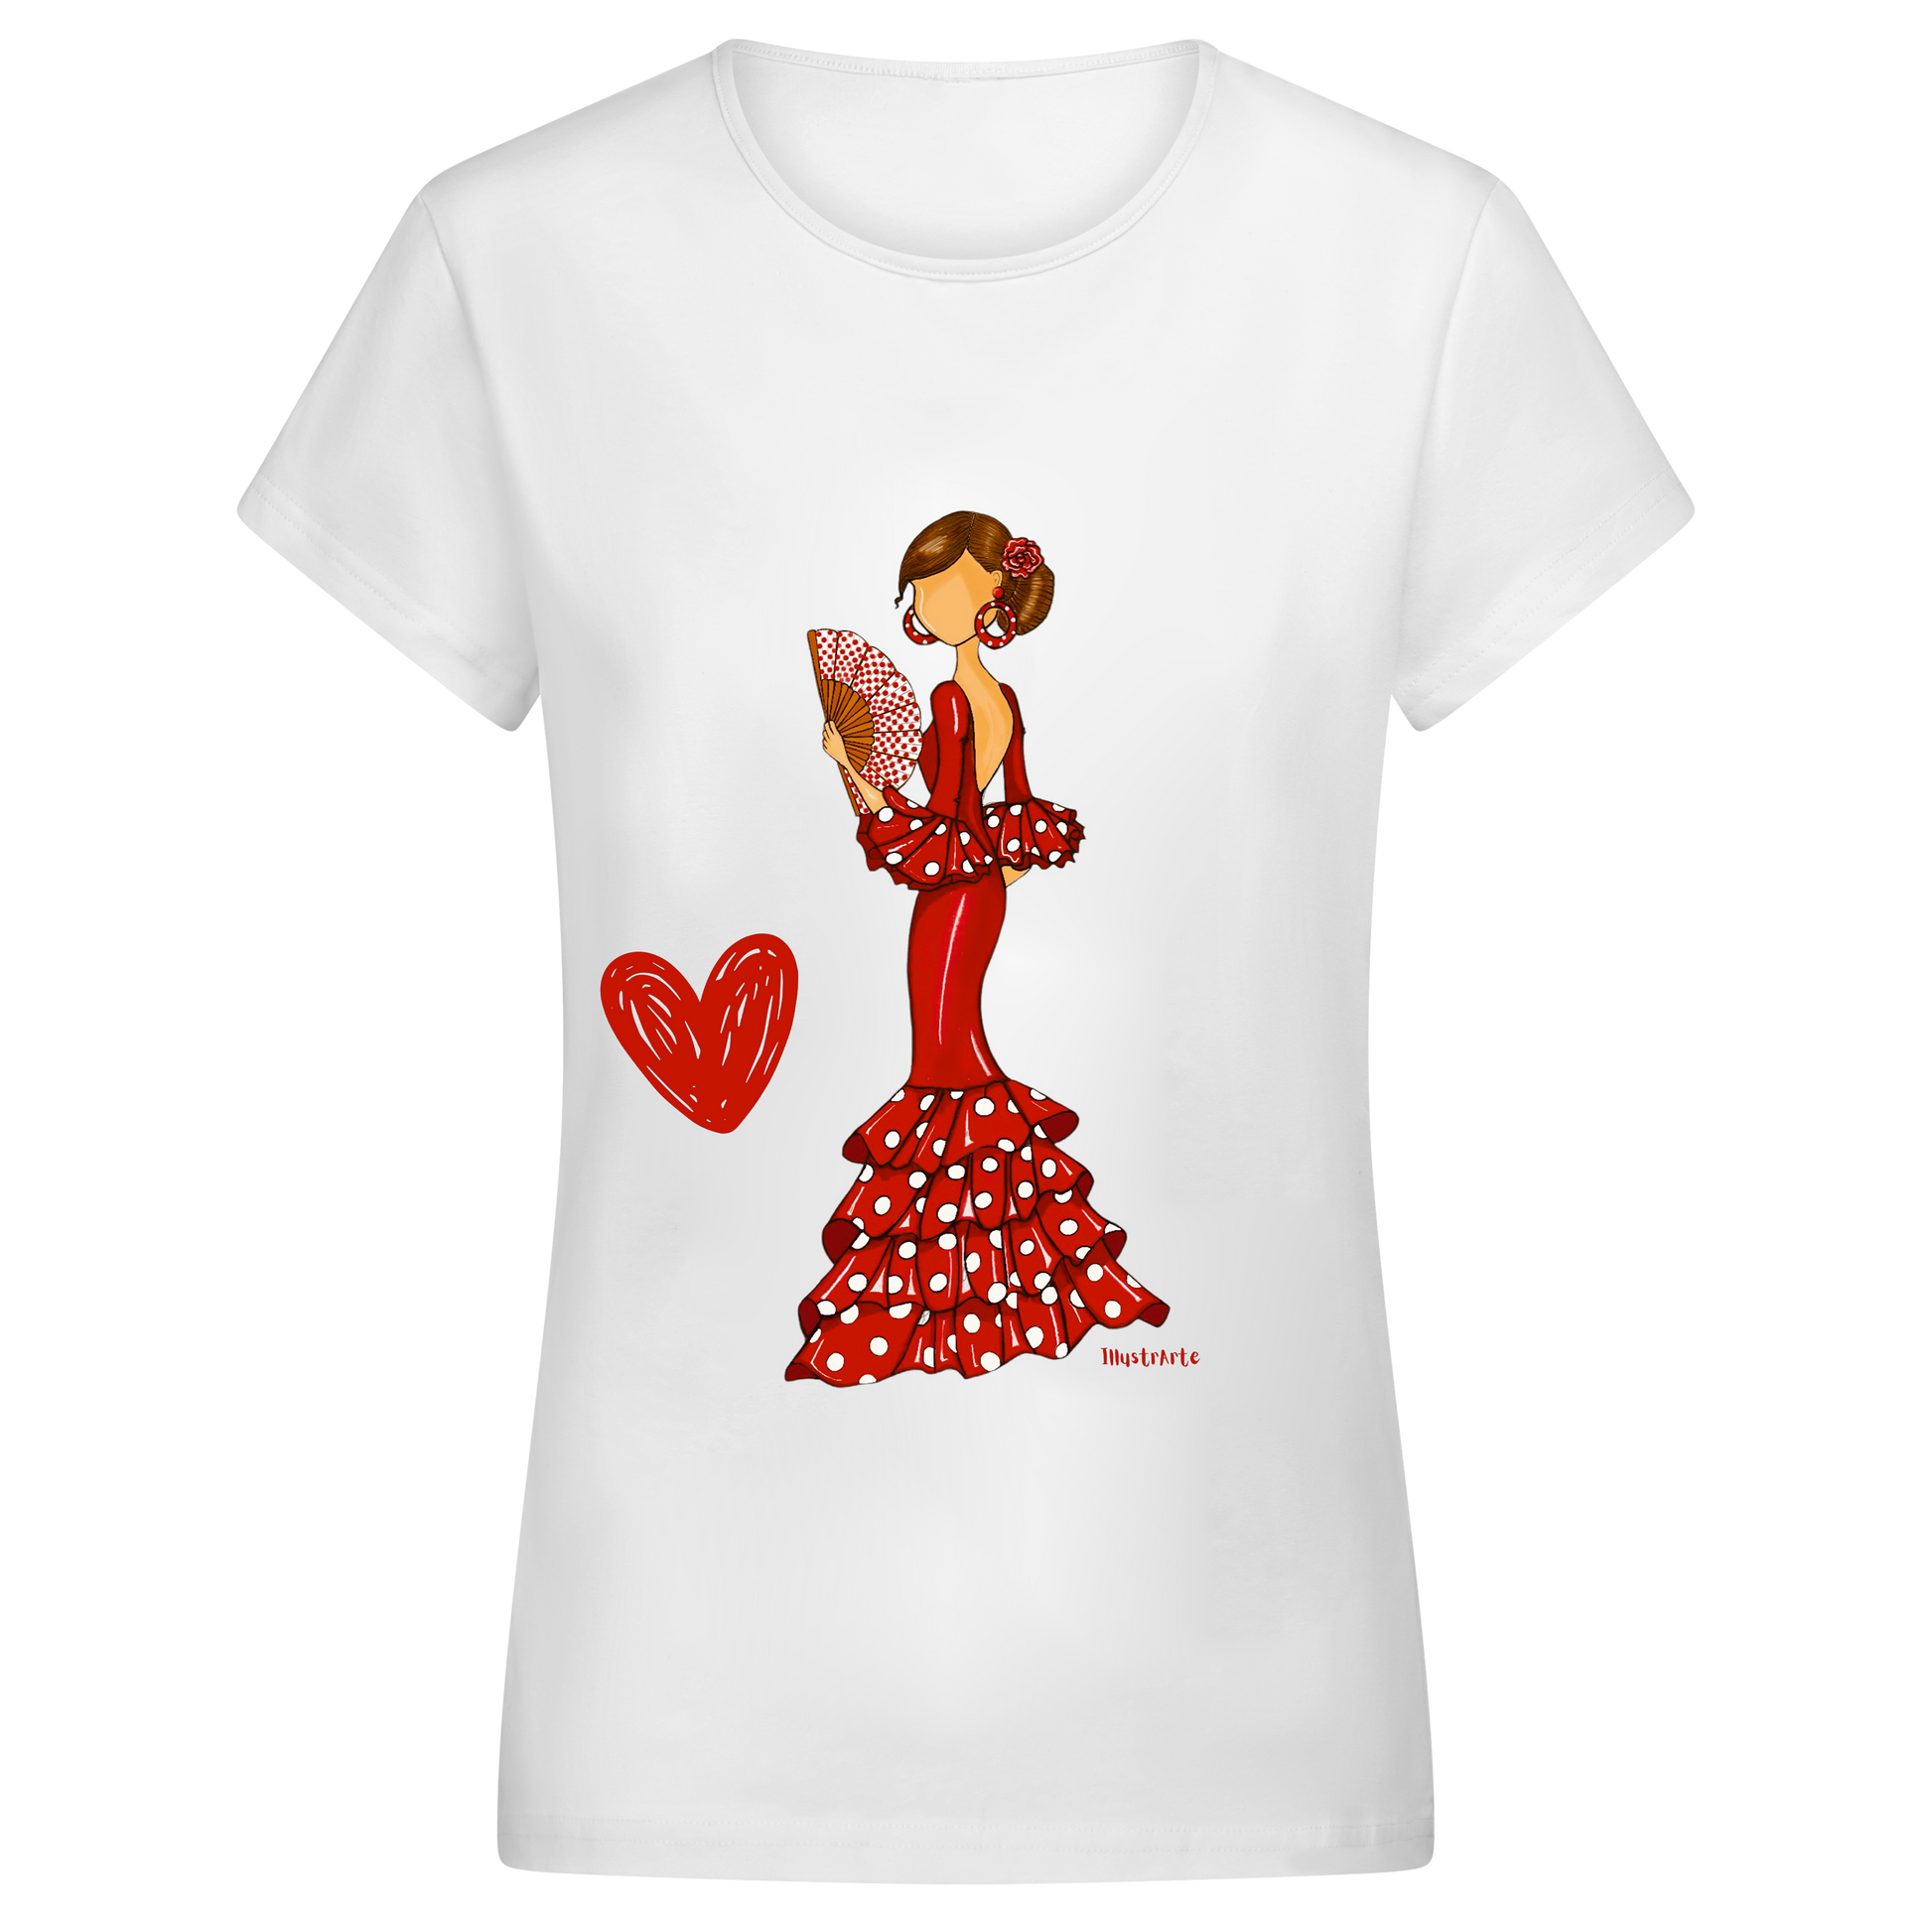 a white t - shirt with a woman in a red dress holding a red heart